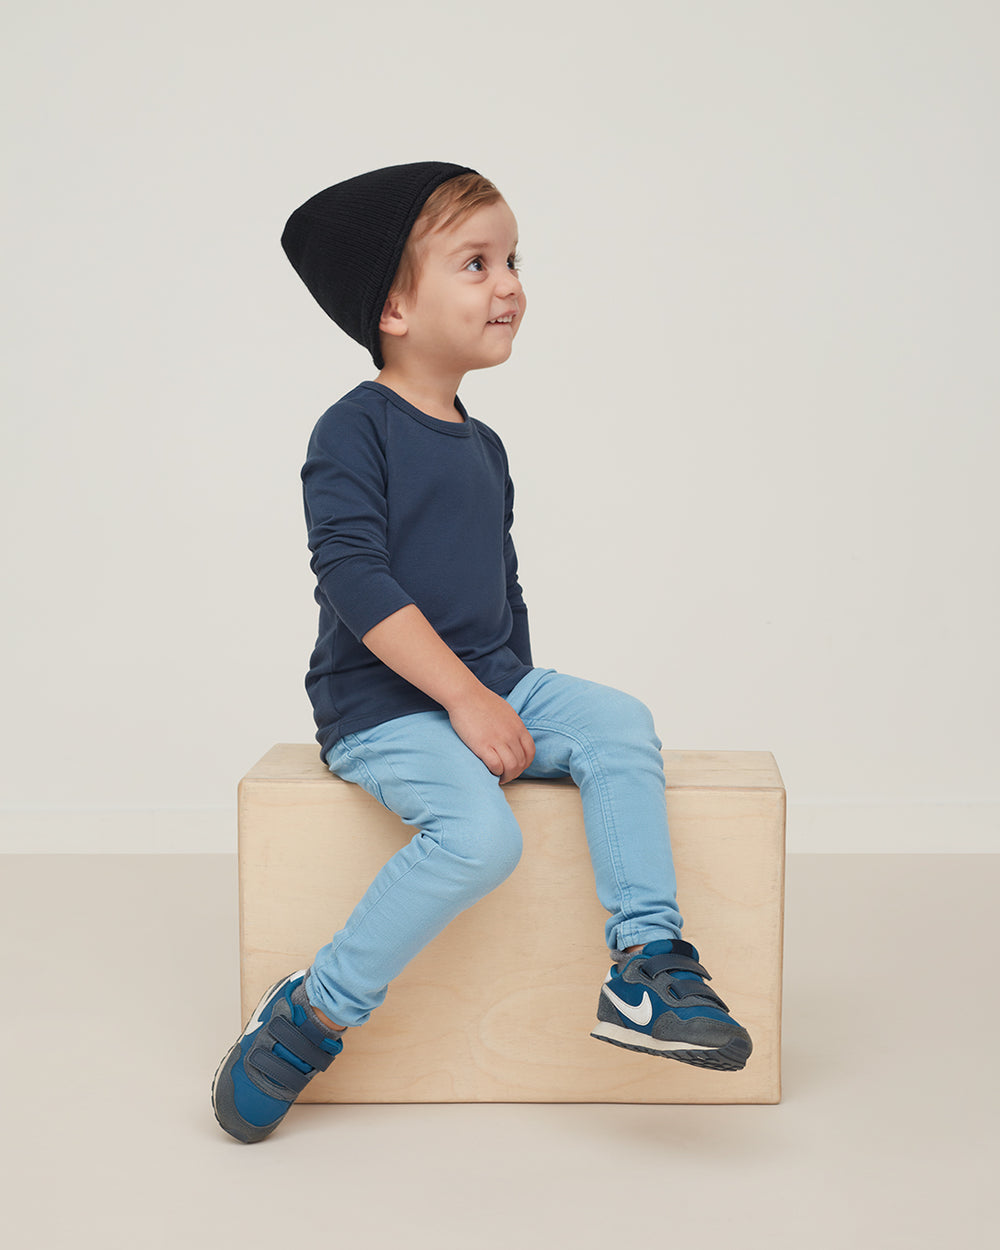 Child sitting on a wooden box, looking to the side